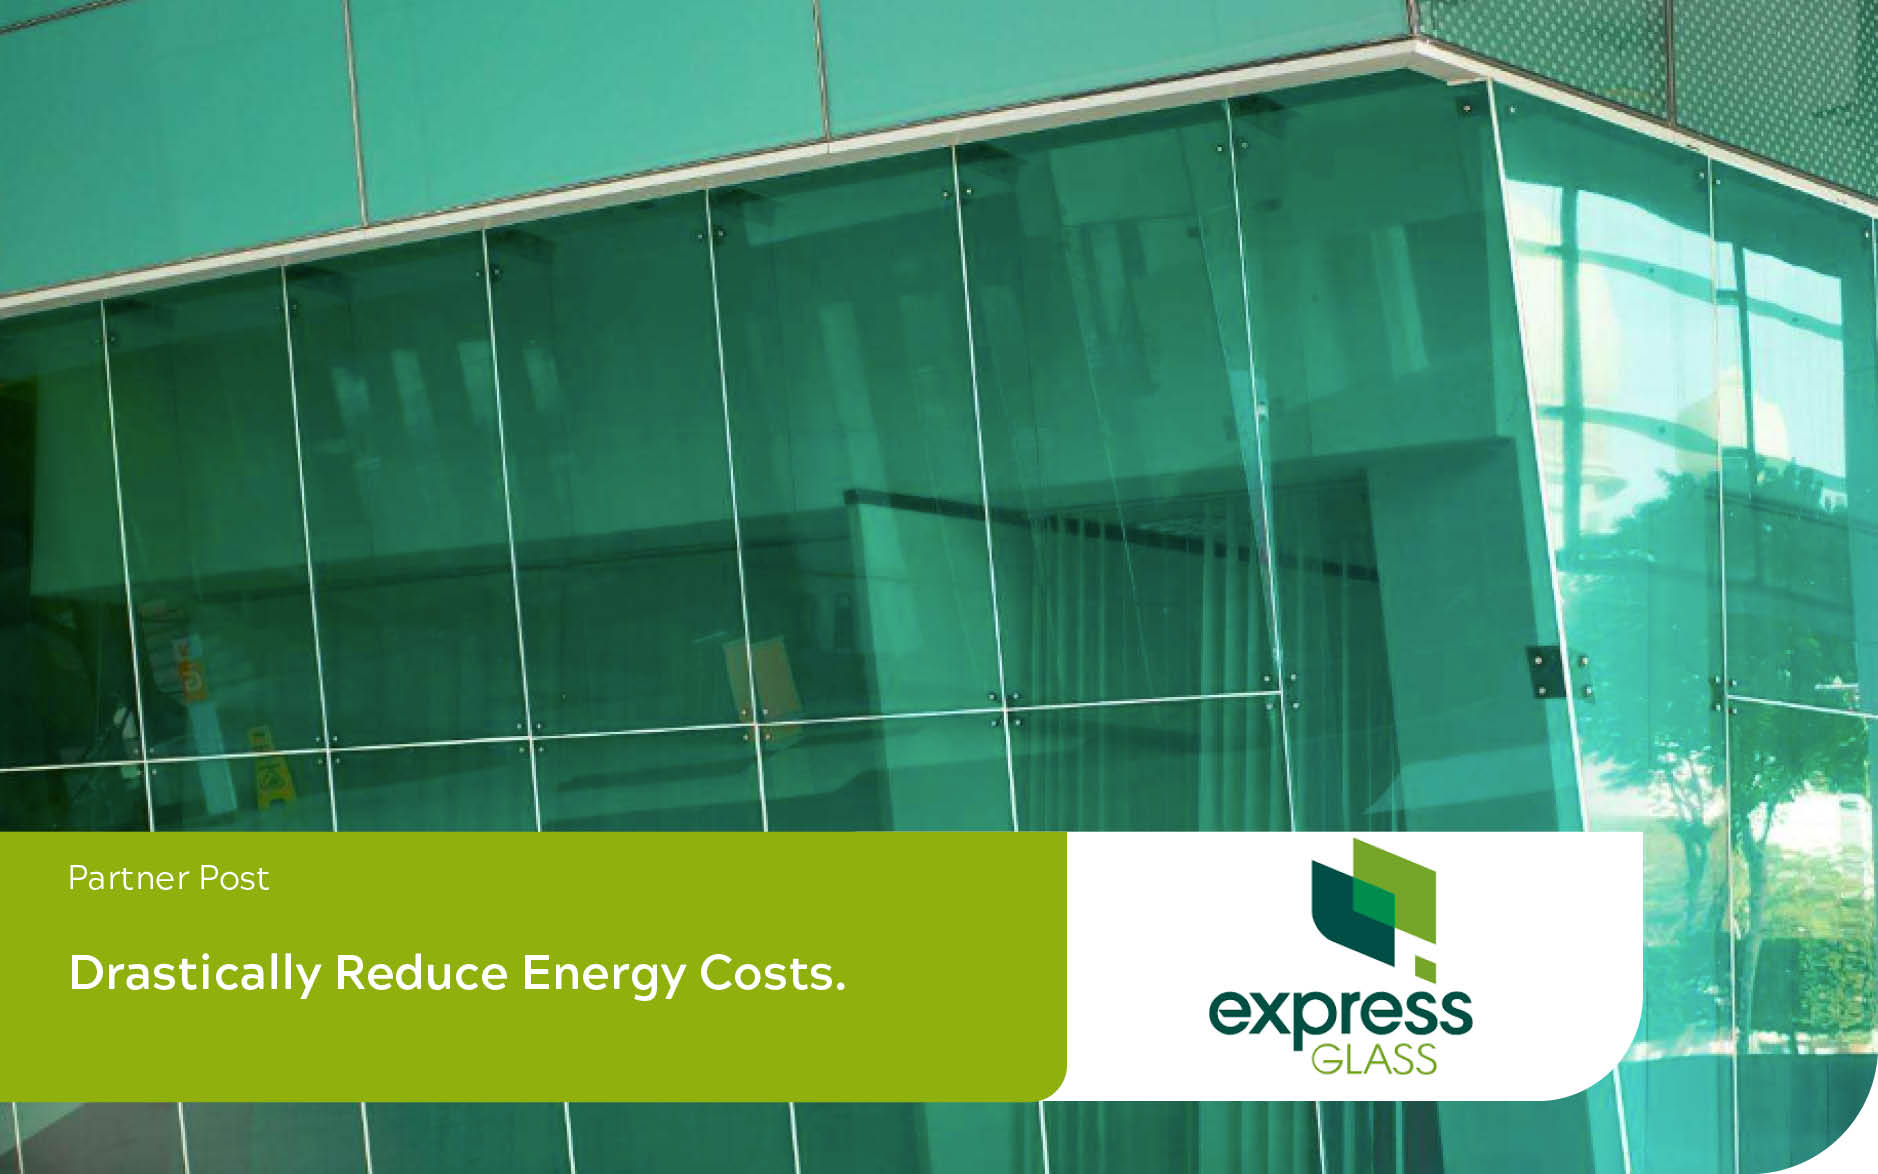 Drastically Reduce Energy Costs by up to 77% with Energy Efficient Windows